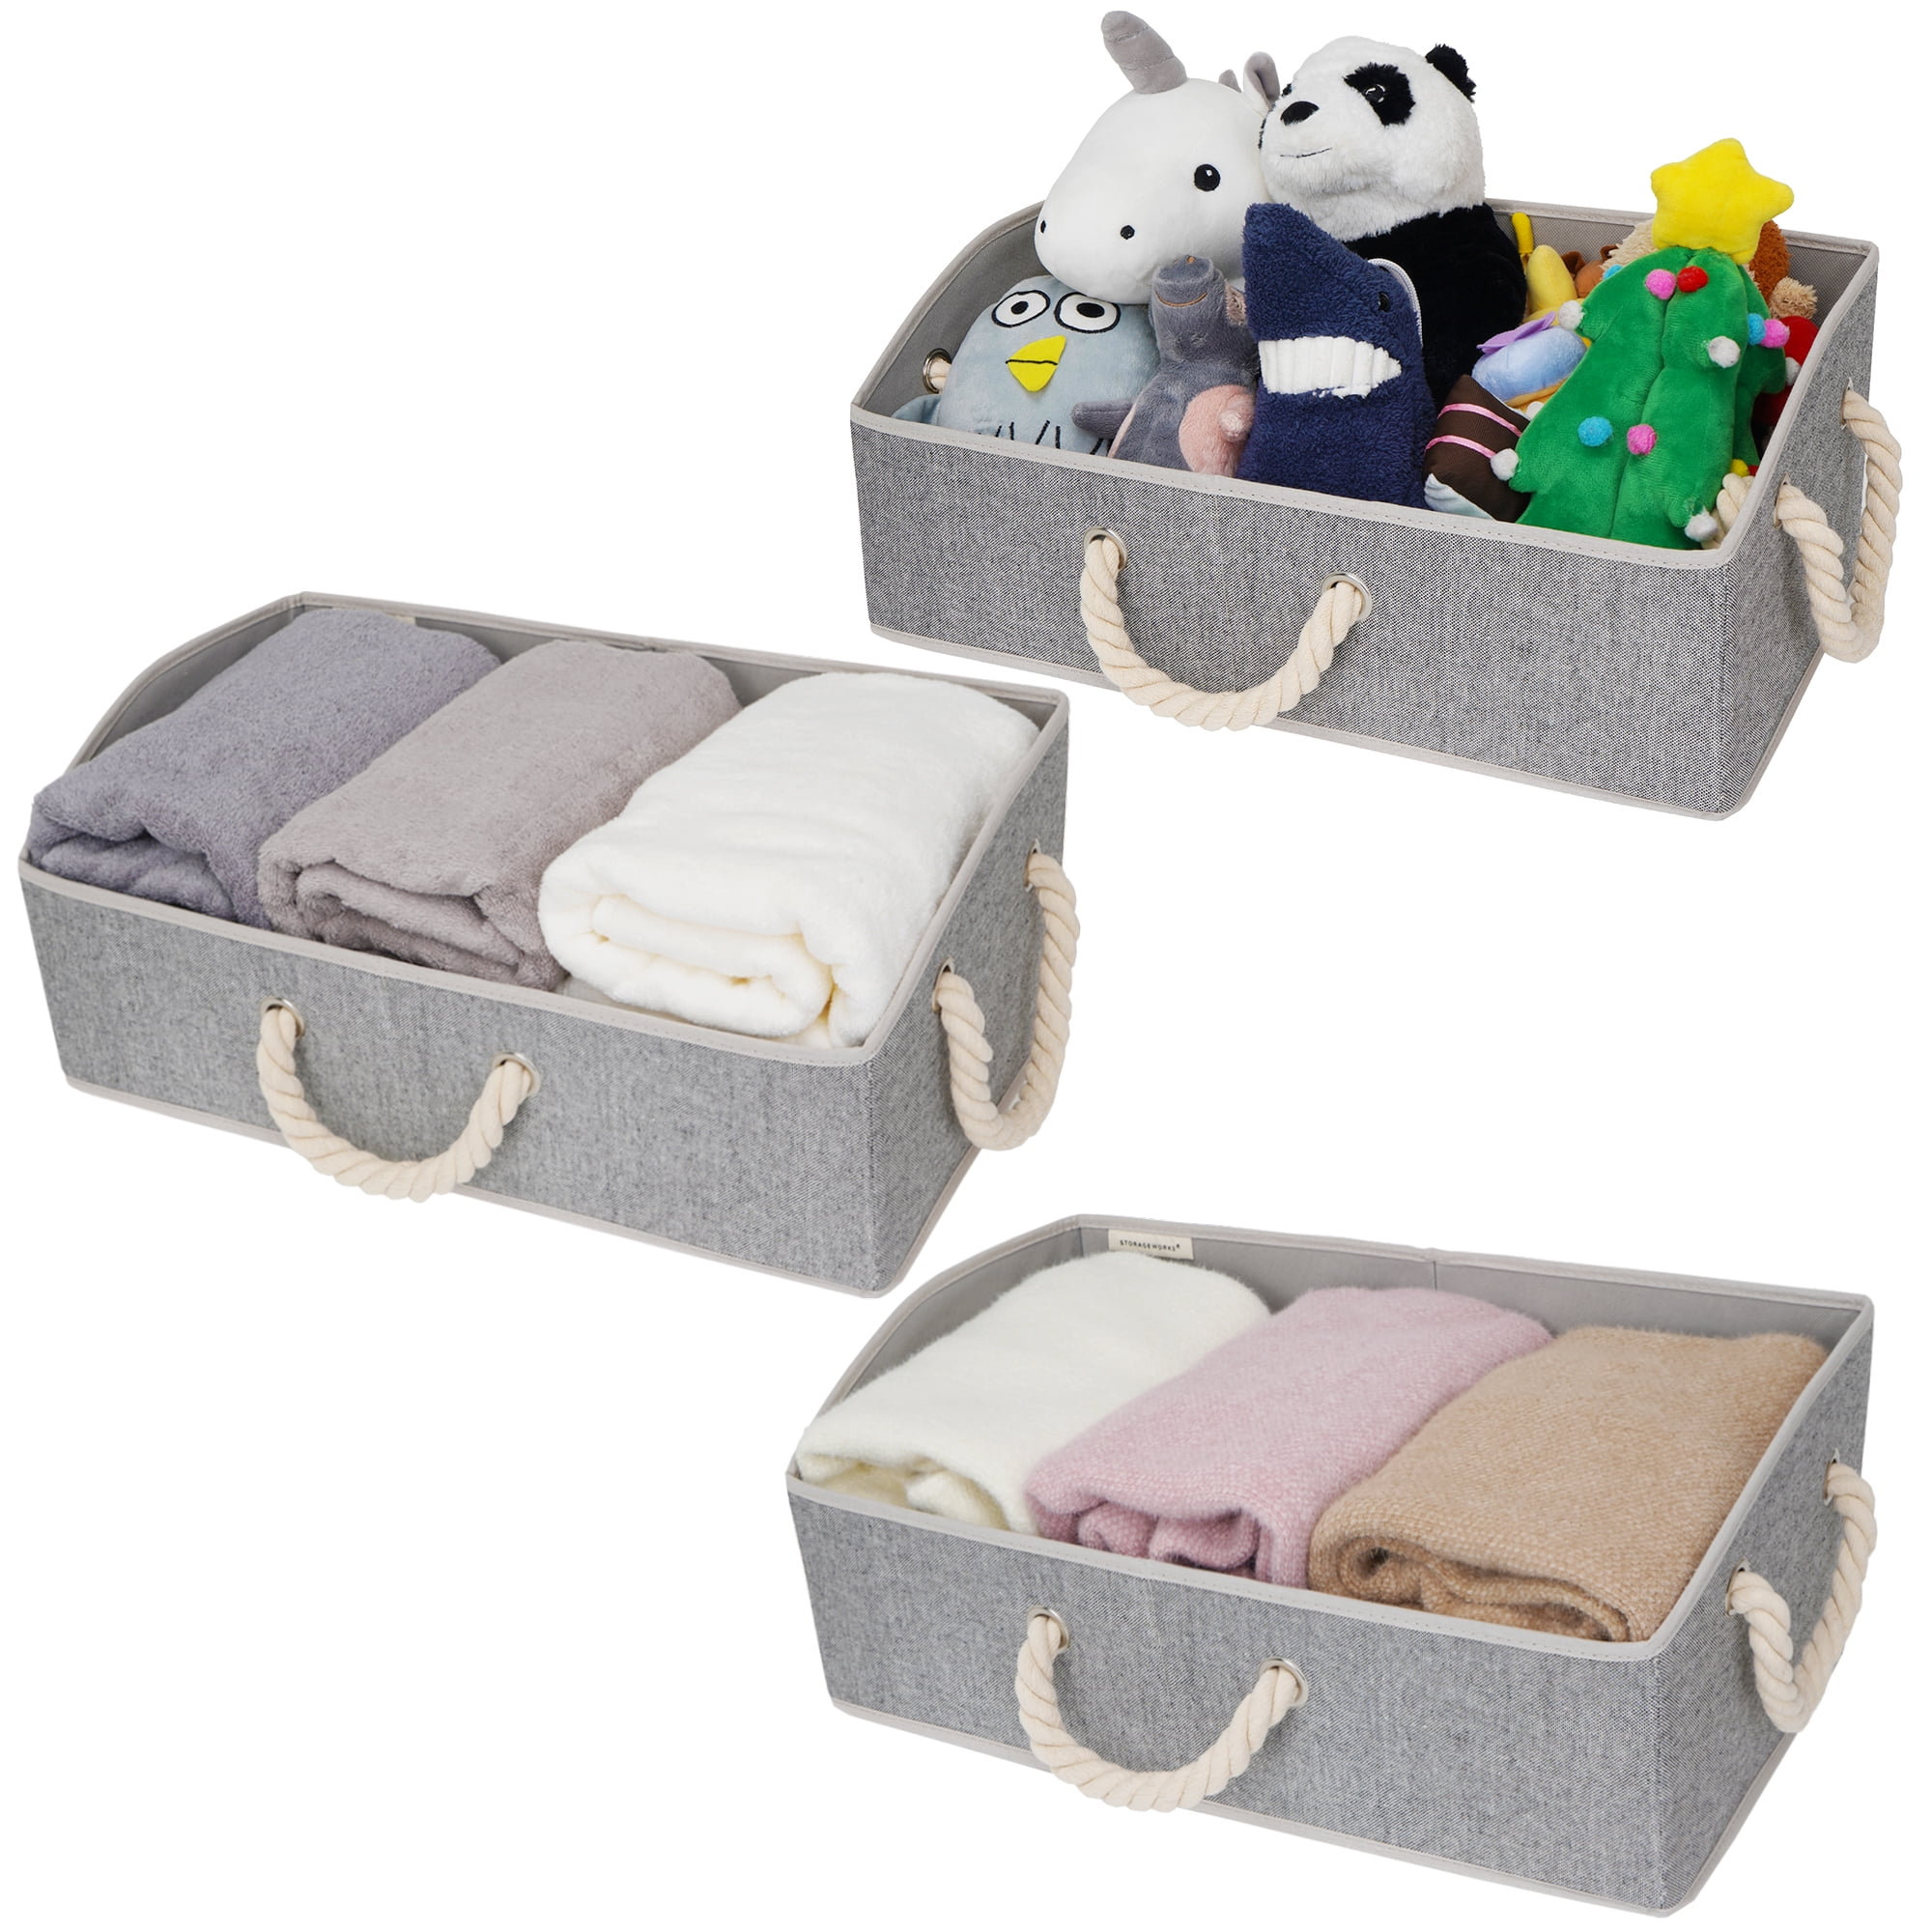 KEEGH Storage Bins for Closet Shelves Storage Baskets for Shelves Trapezoid  Storage Bin Fabric Organizer Bins for Clothes with Handles,Beige,Set of 3